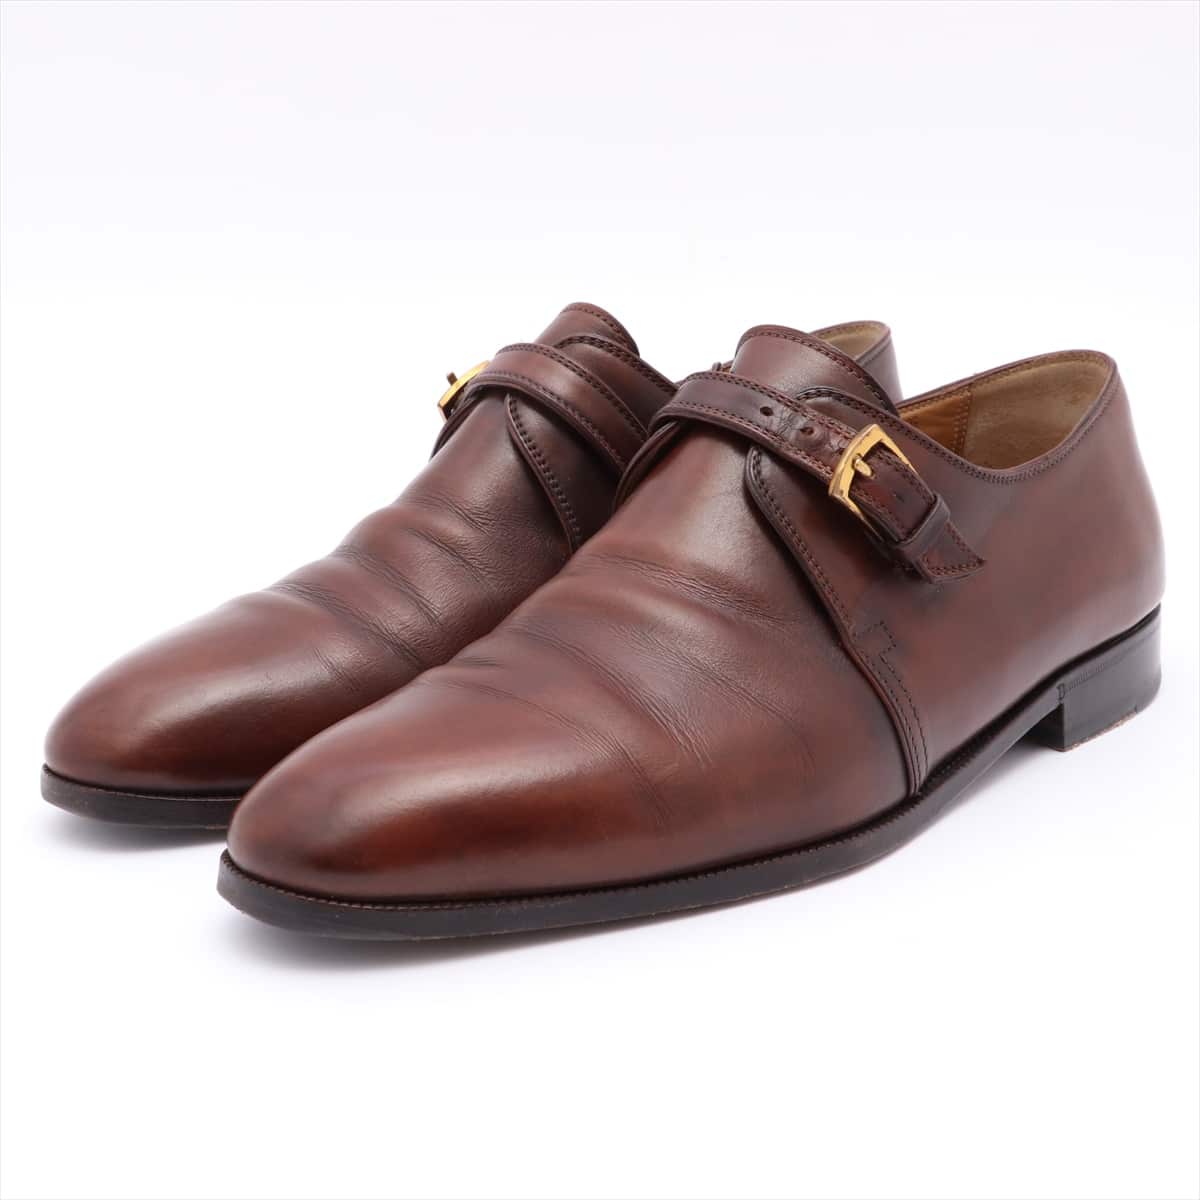 Berluti Leather Leather shoes 8.5 Men's Brown With genuine shoe tree Stained